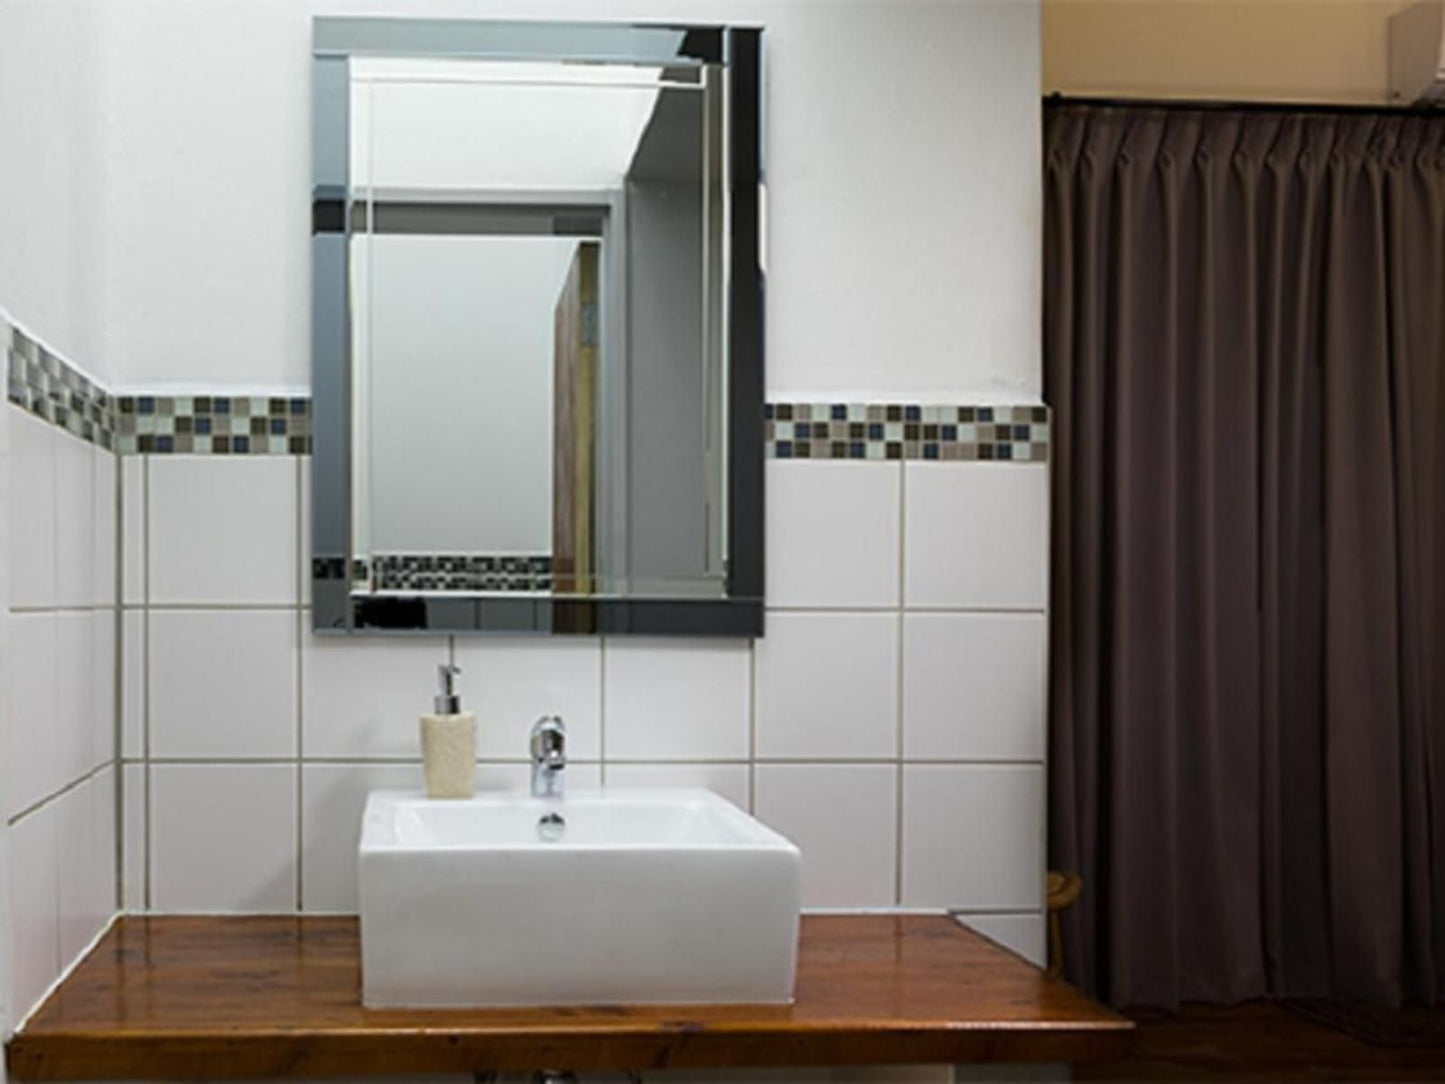 Horse And Mill Guest House Colesberg Northern Cape South Africa Bathroom